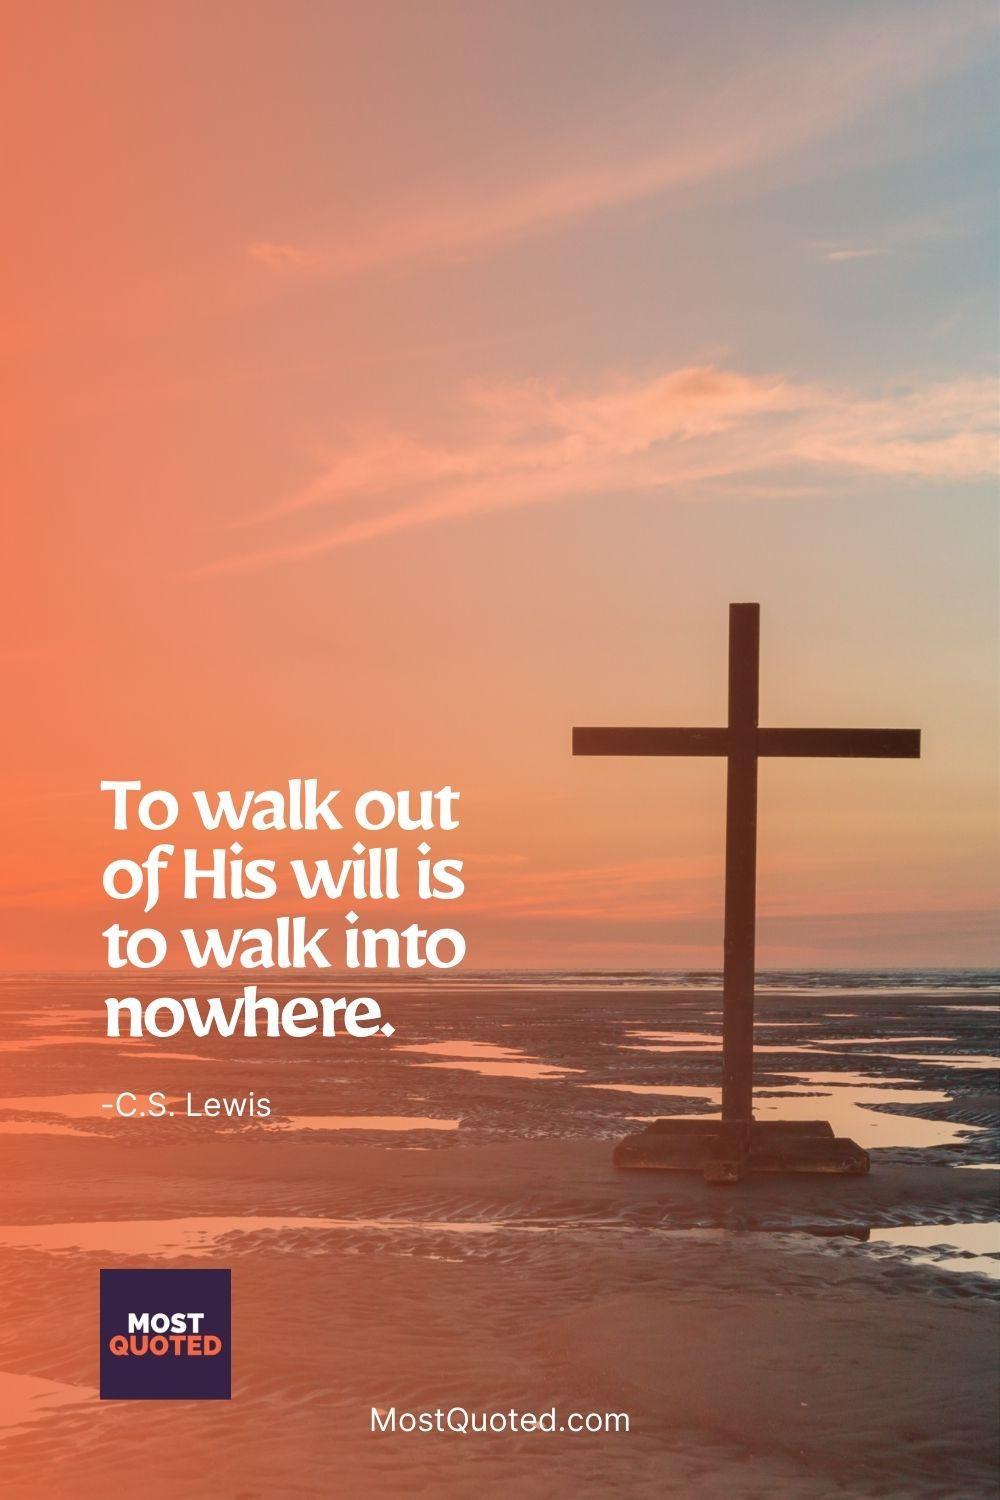 To walk out of His will is to walk into nowhere. - C.S. Lewis